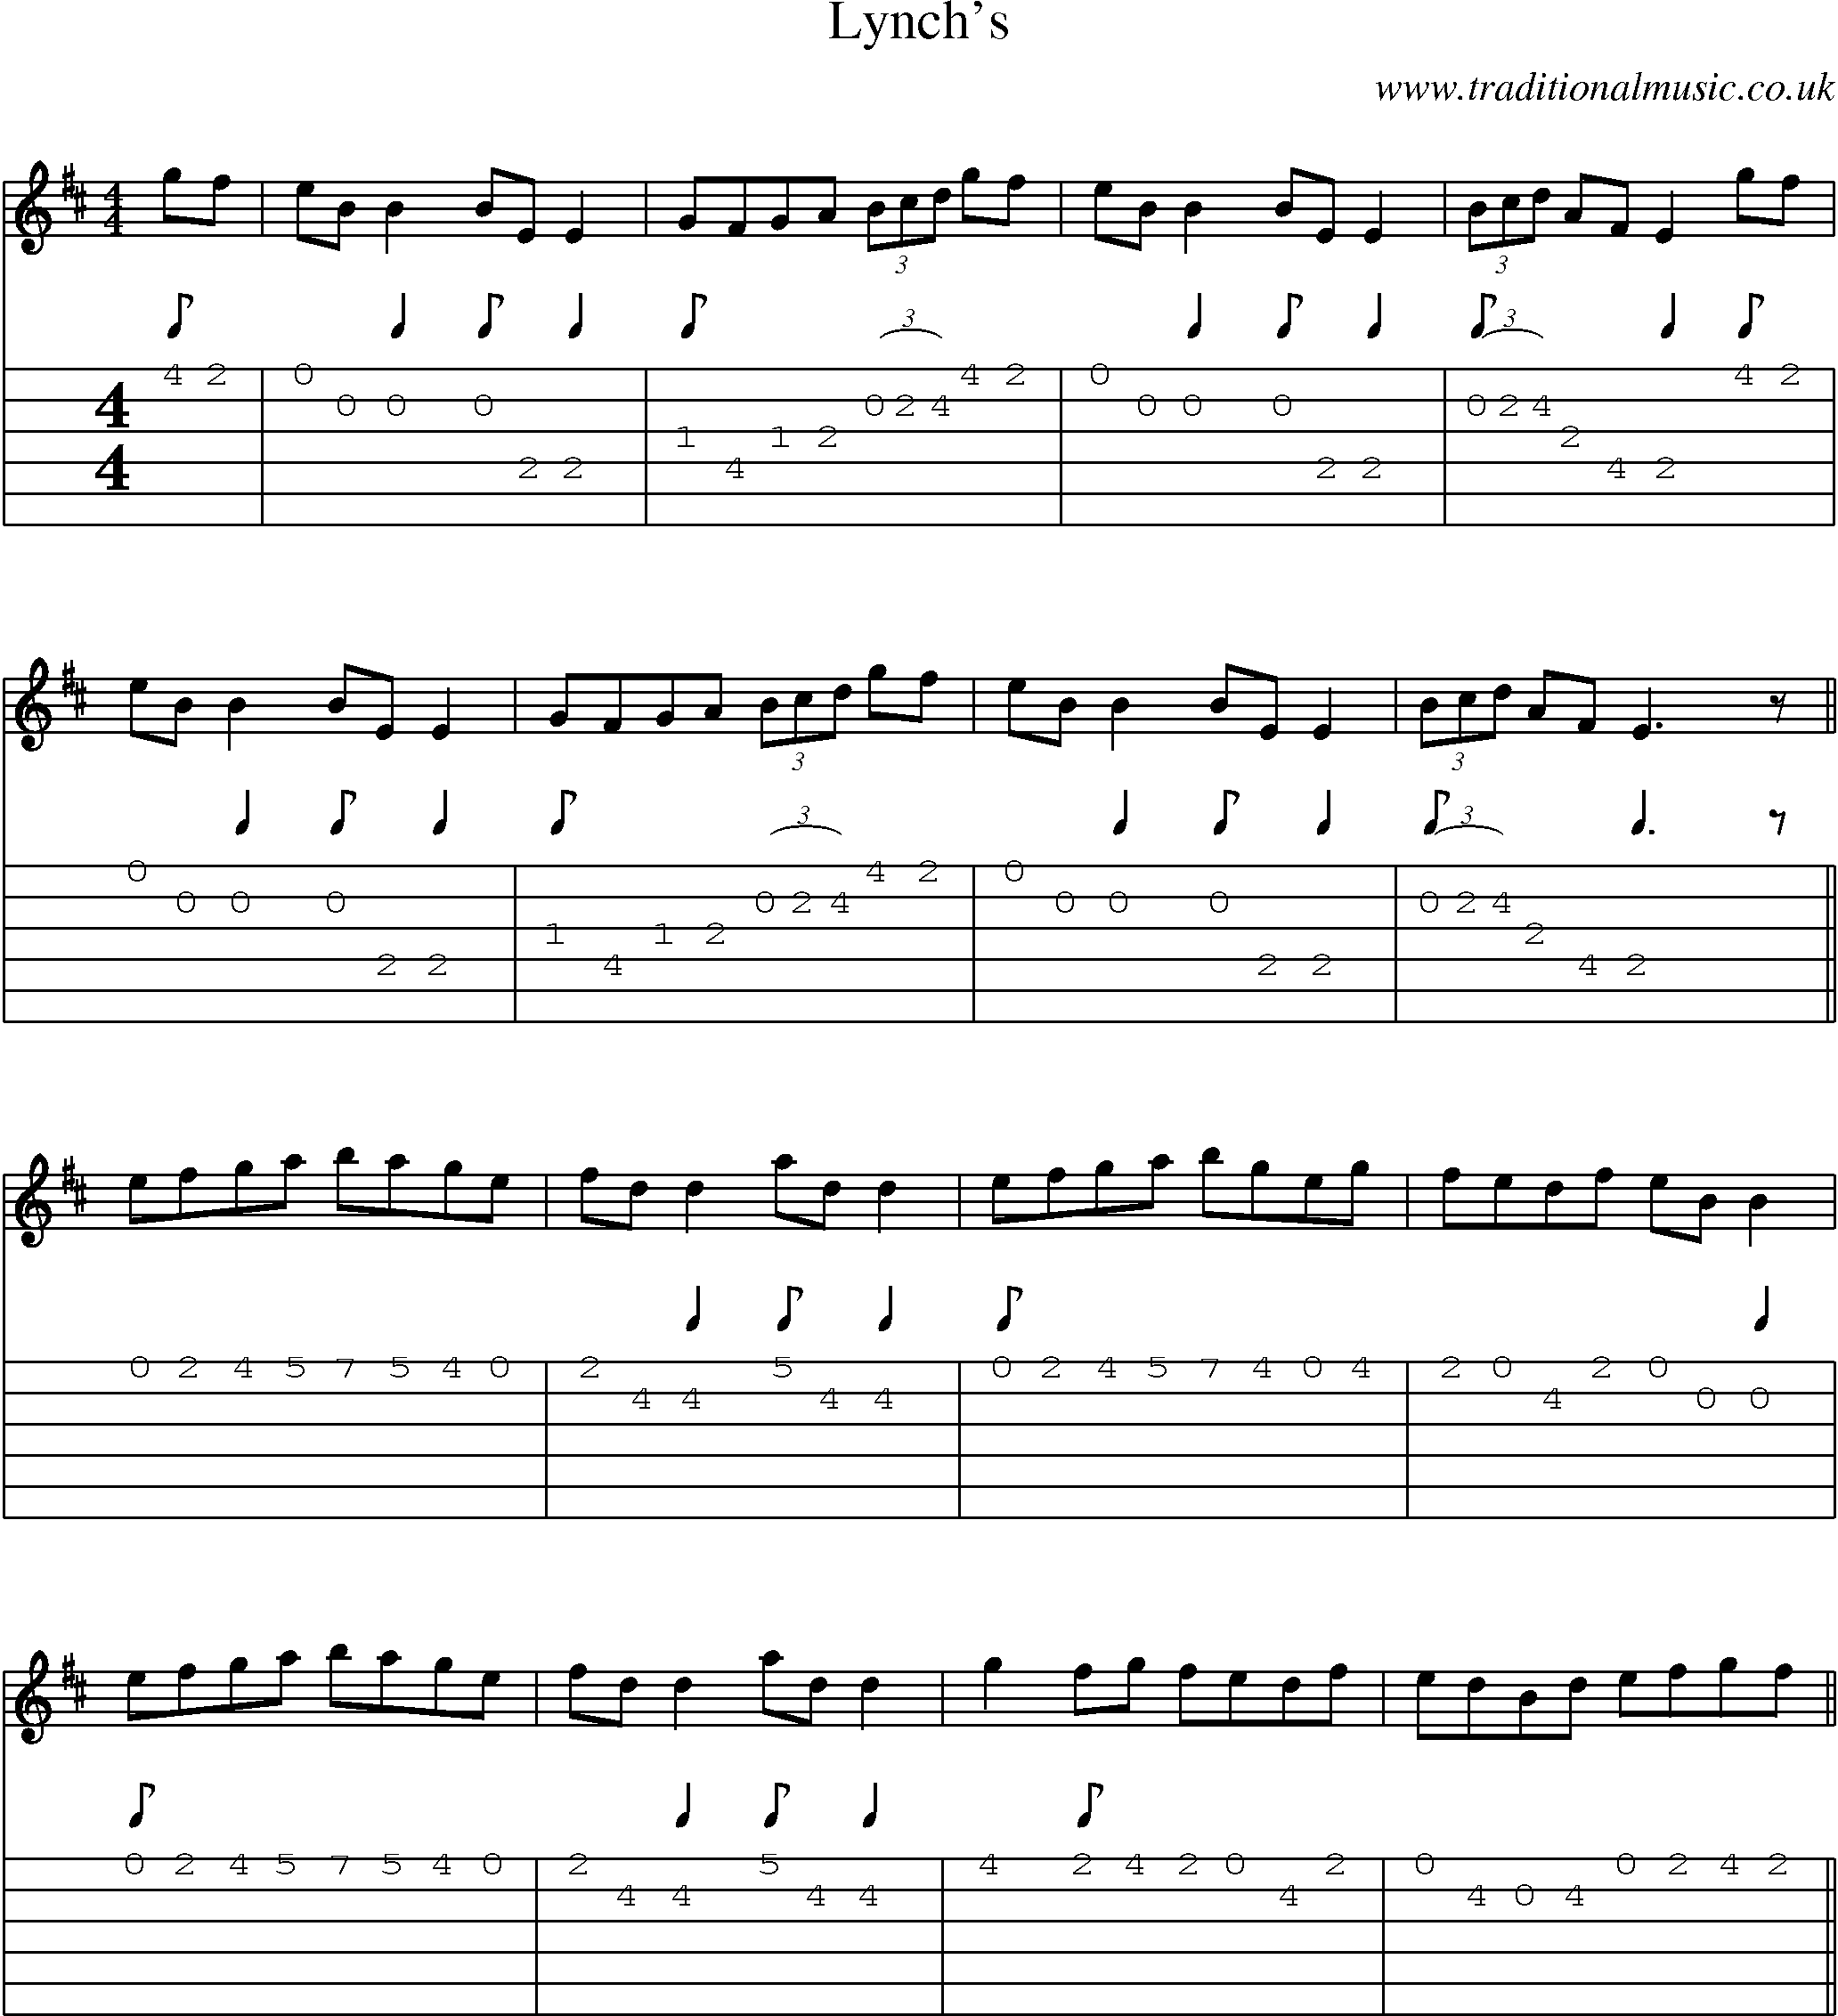 Music Score and Guitar Tabs for Lynchs